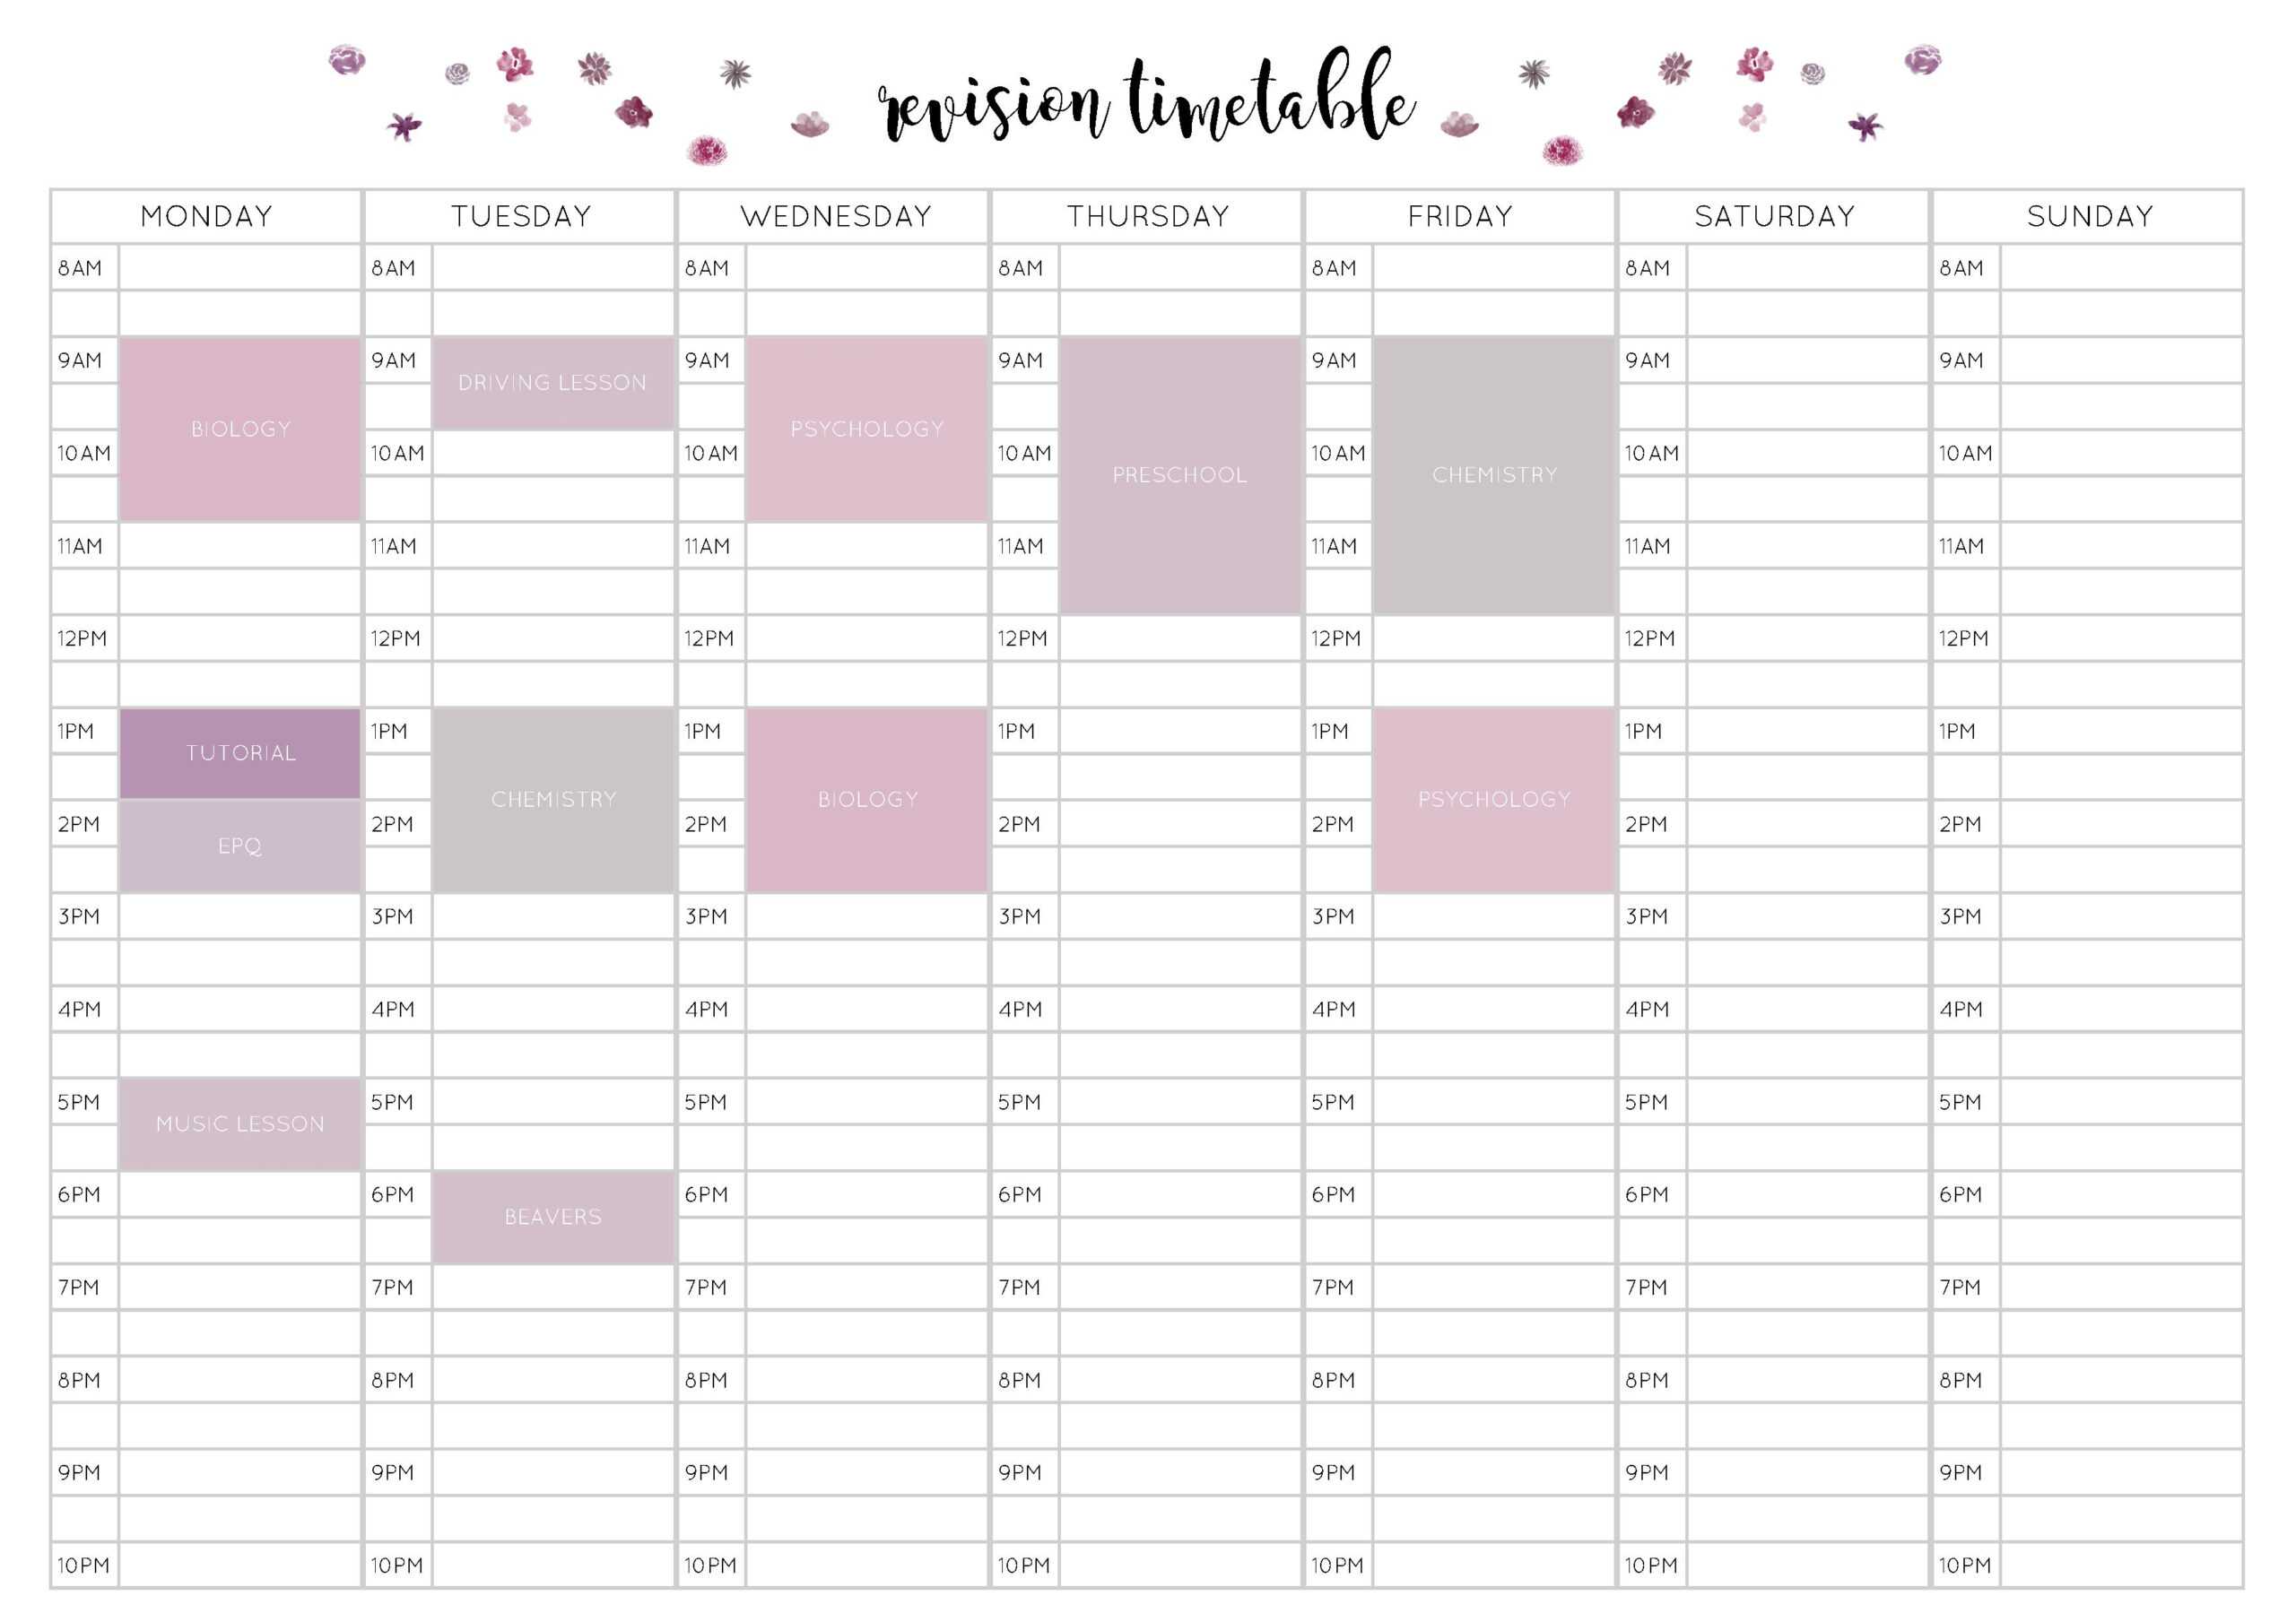 Free Revision Timetable Printable – Emily Studies With Blank Revision Timetable Template